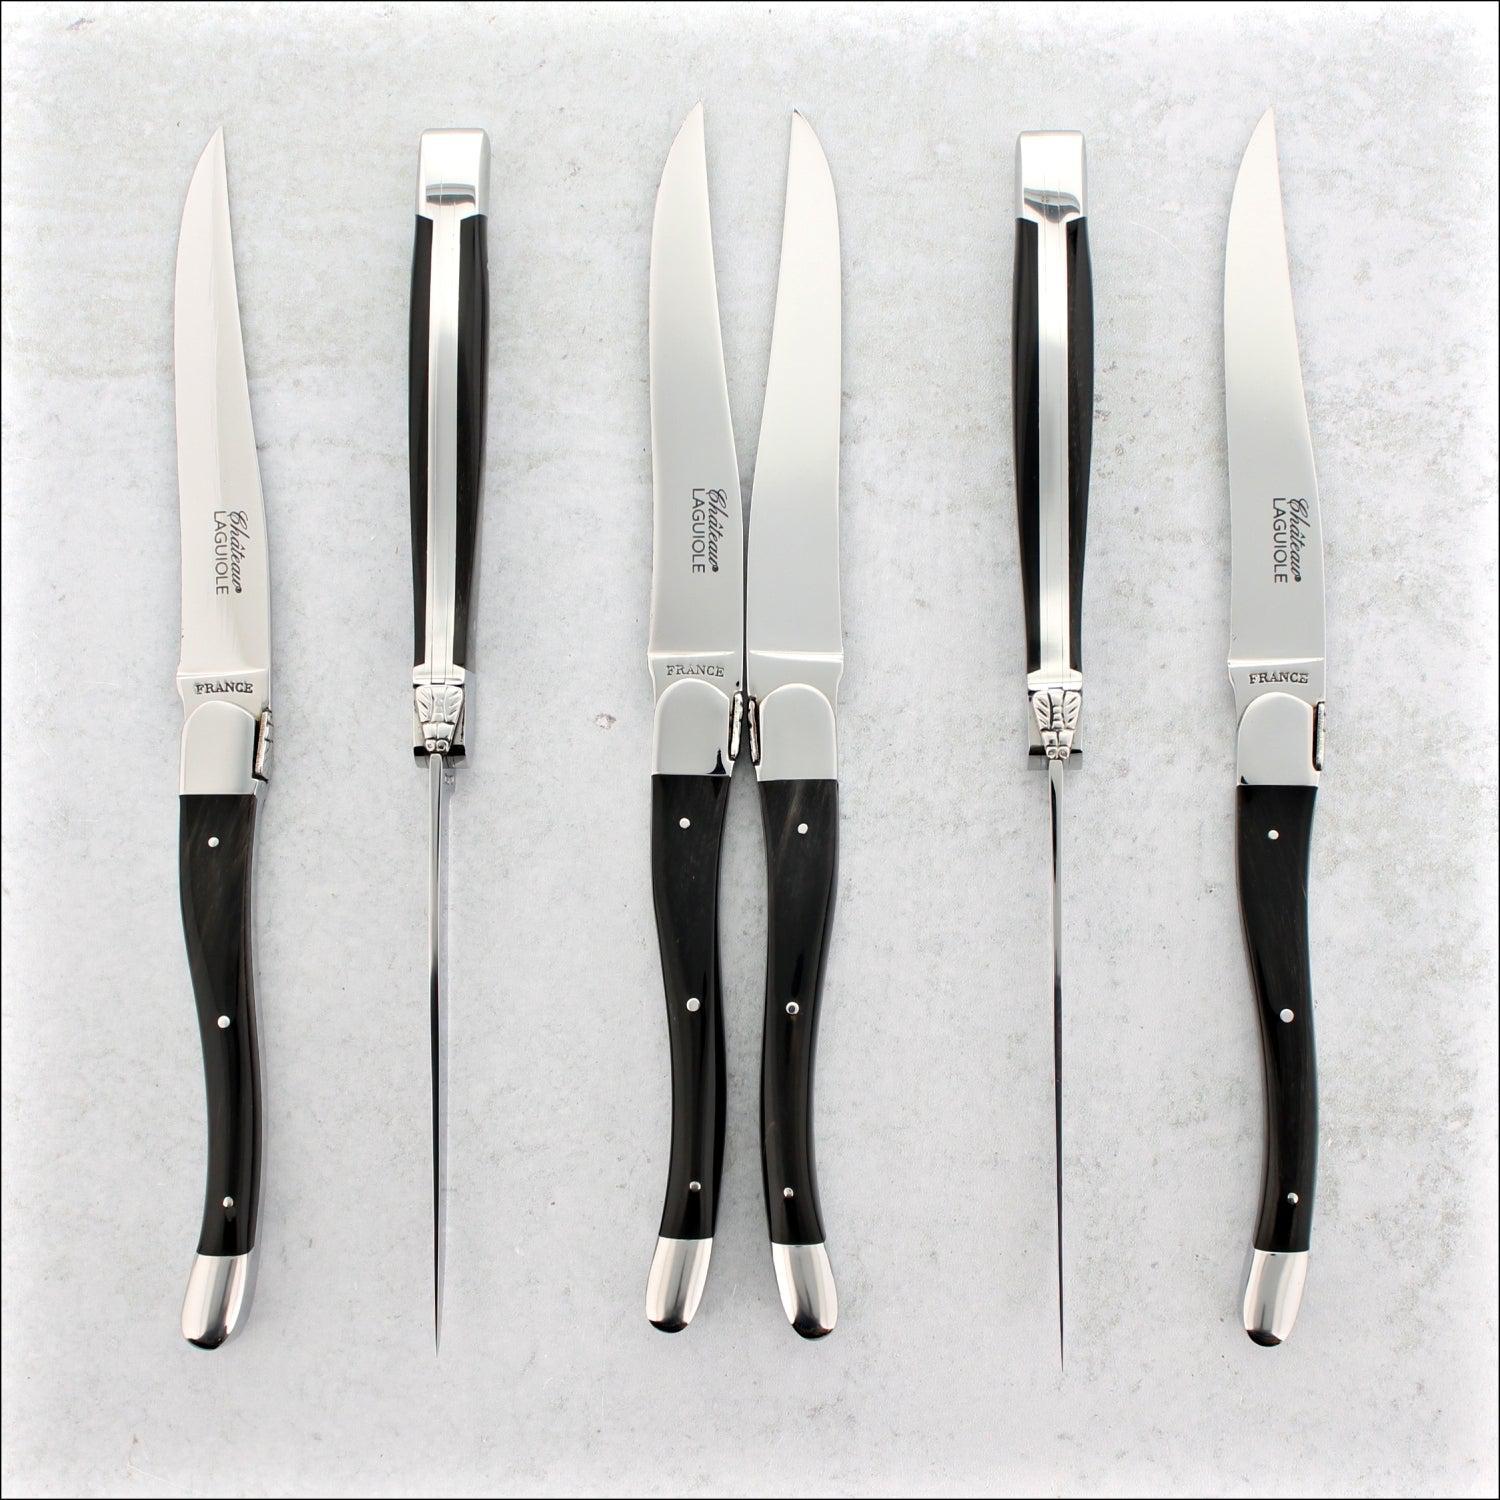 https://www.laguiole-imports.com/cdn/shop/files/Chateau-Laguiole-Signature-Steak-Knives-Dark-Horn-Tip-Shiny-Finish-Chateau-Laguioler-Made-in-France-2.jpg?v=1704104804